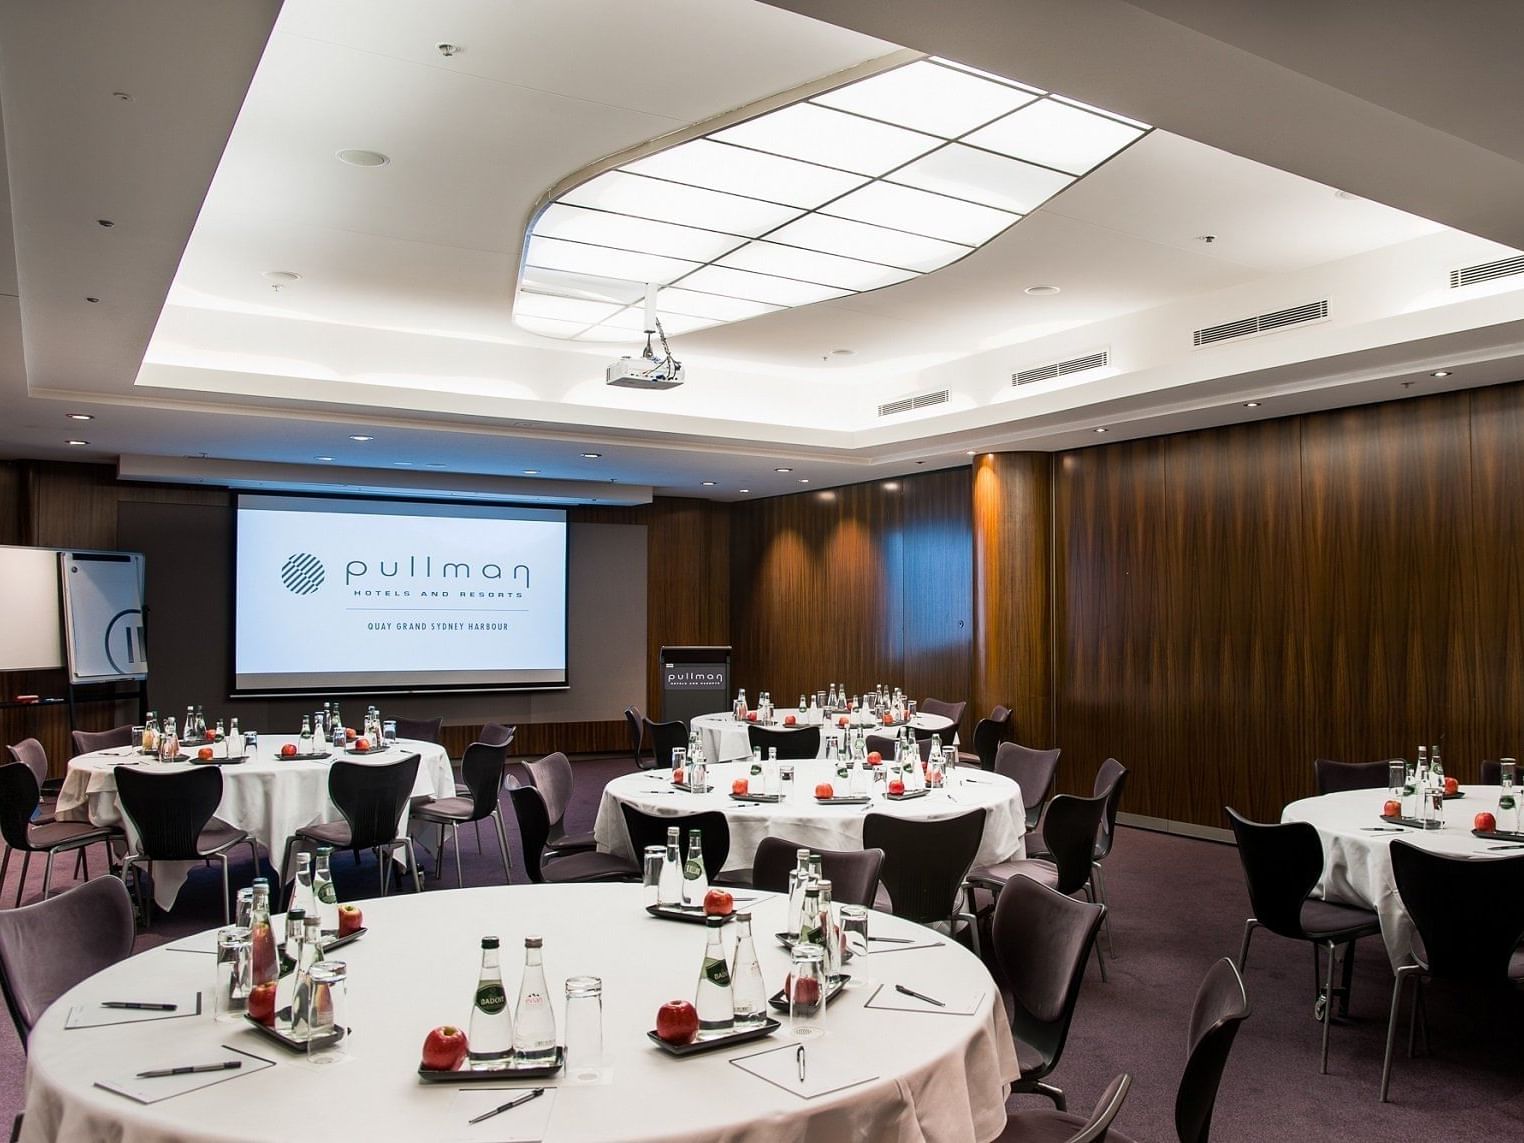 Banquets in Lachlan meeting Room at Pullman Quay Grand Sydney